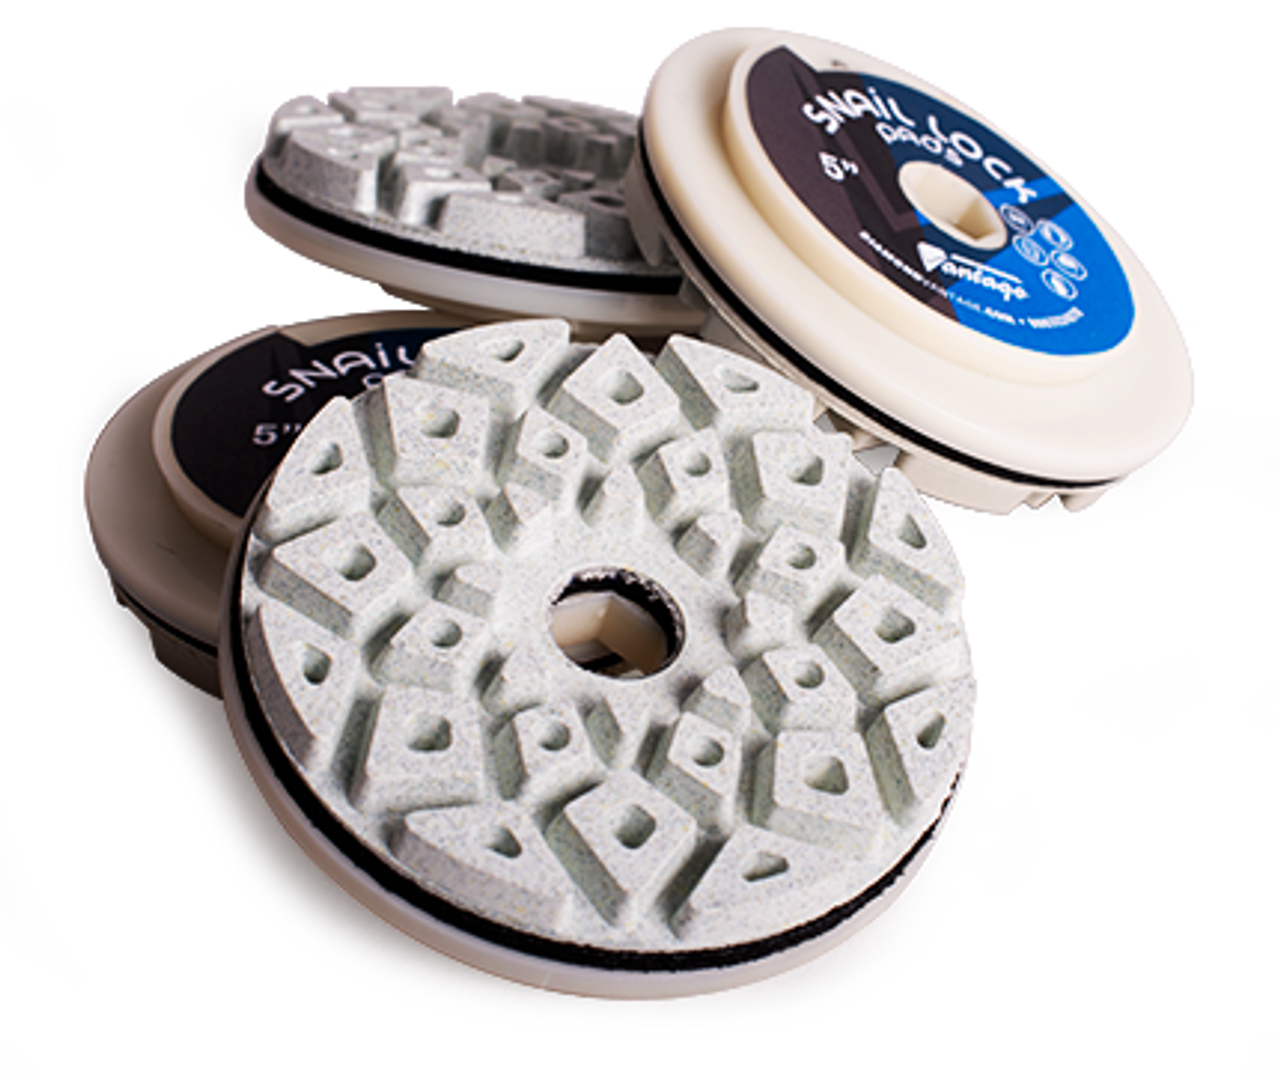 Diamond Vantage 6? x Snail Lock In-Line Polishing Pad for Natural and Engineered Stone, 100 Grit